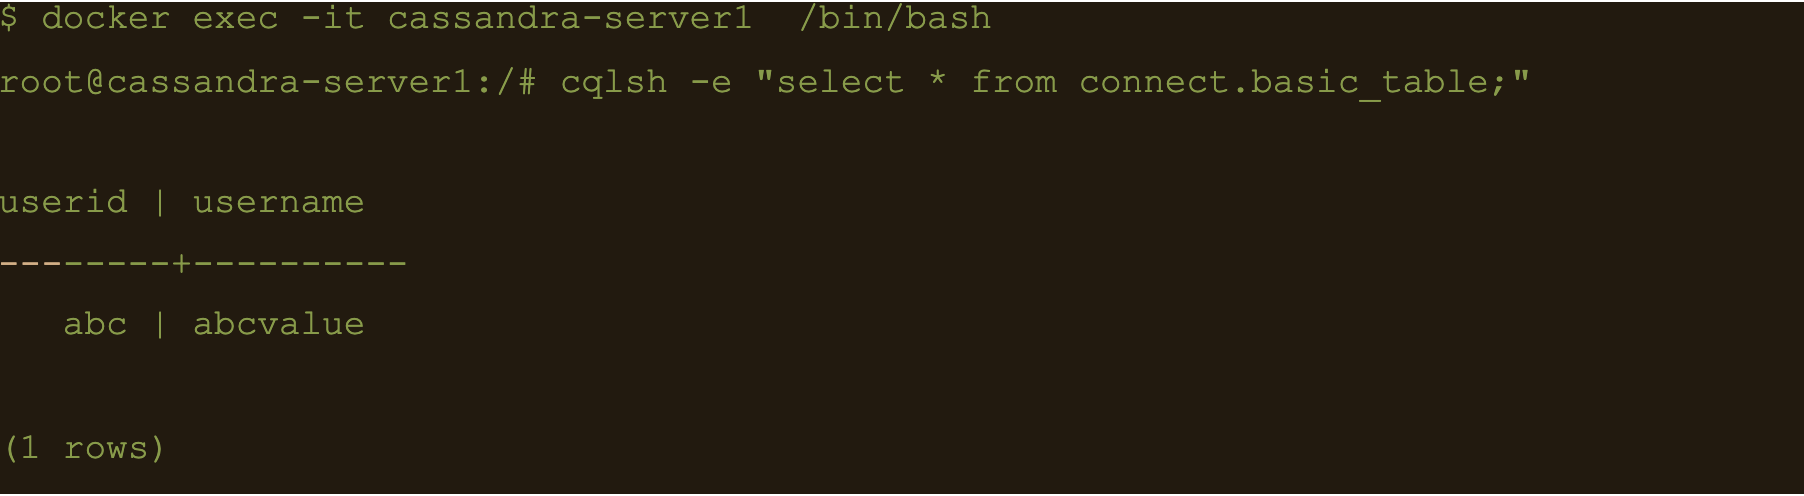 cqlsh -e cqlsh -e "select * from connect.basic_table;"